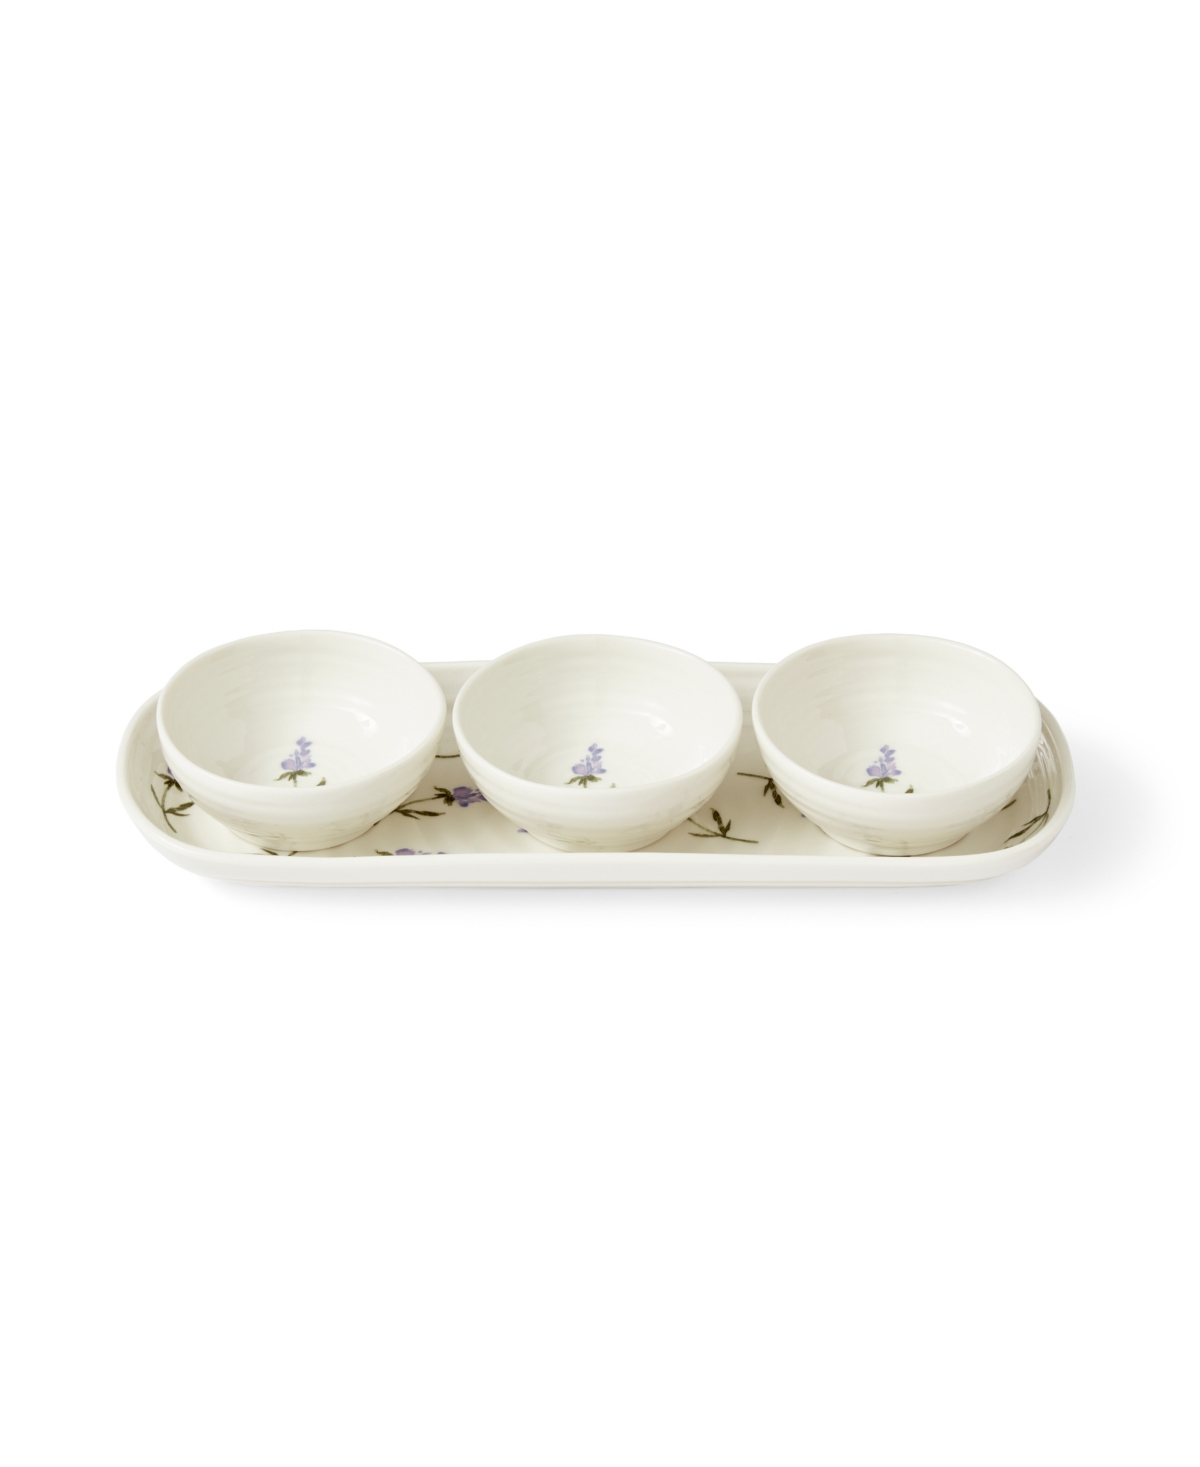 Portmeirion Sophie Conran Lavandula 4 Piece Bowl And Tray Set In White